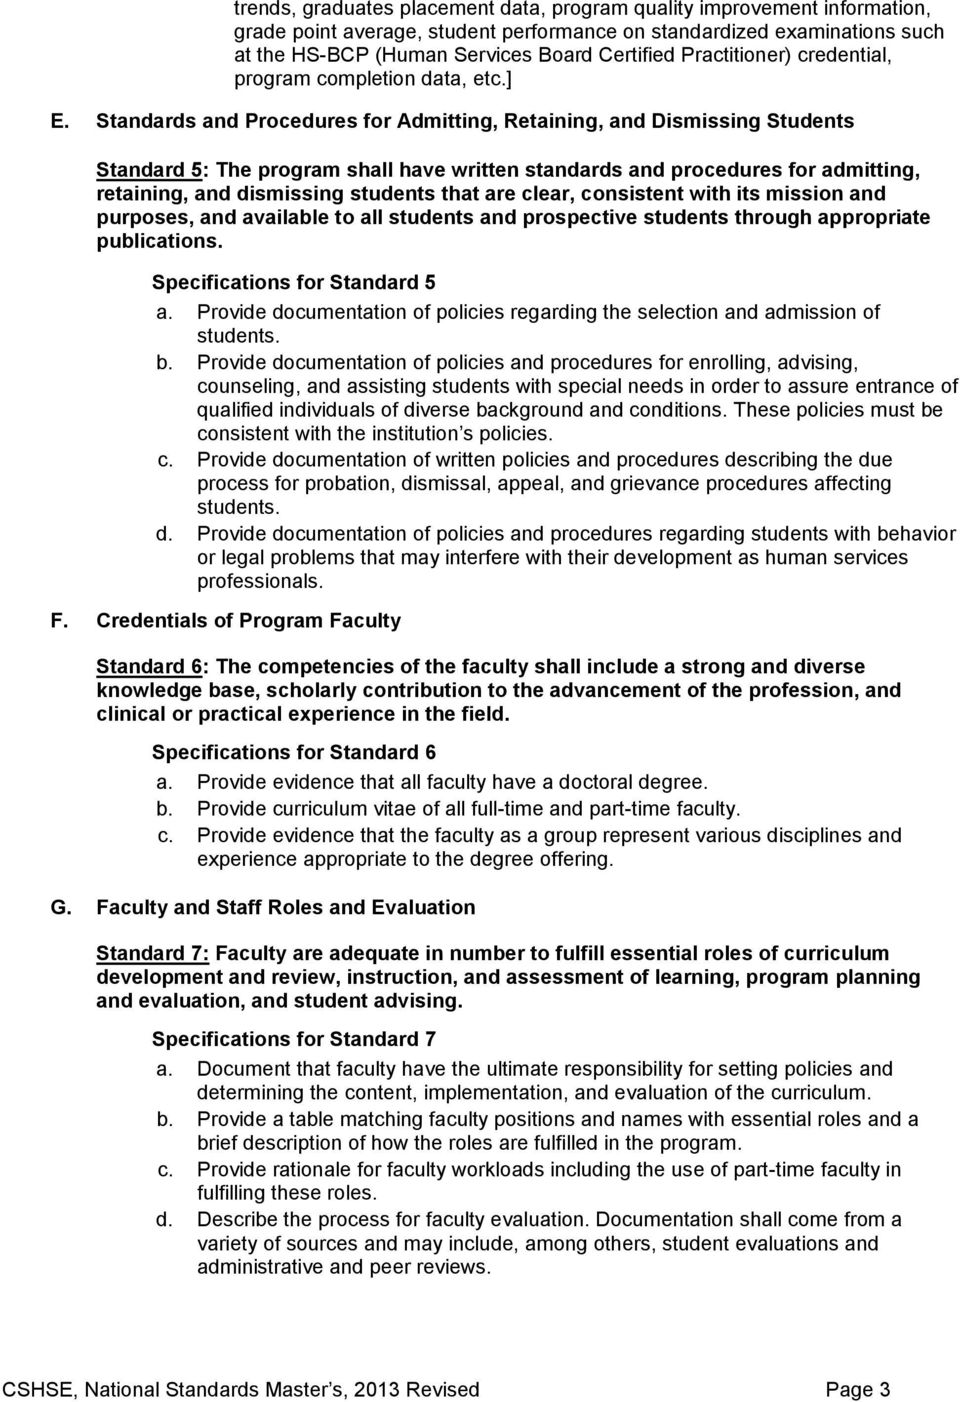 Standards and Procedures for Admitting, Retaining, and Dismissing Students Standard 5: The program shall have written standards and procedures for admitting, retaining, and dismissing students that